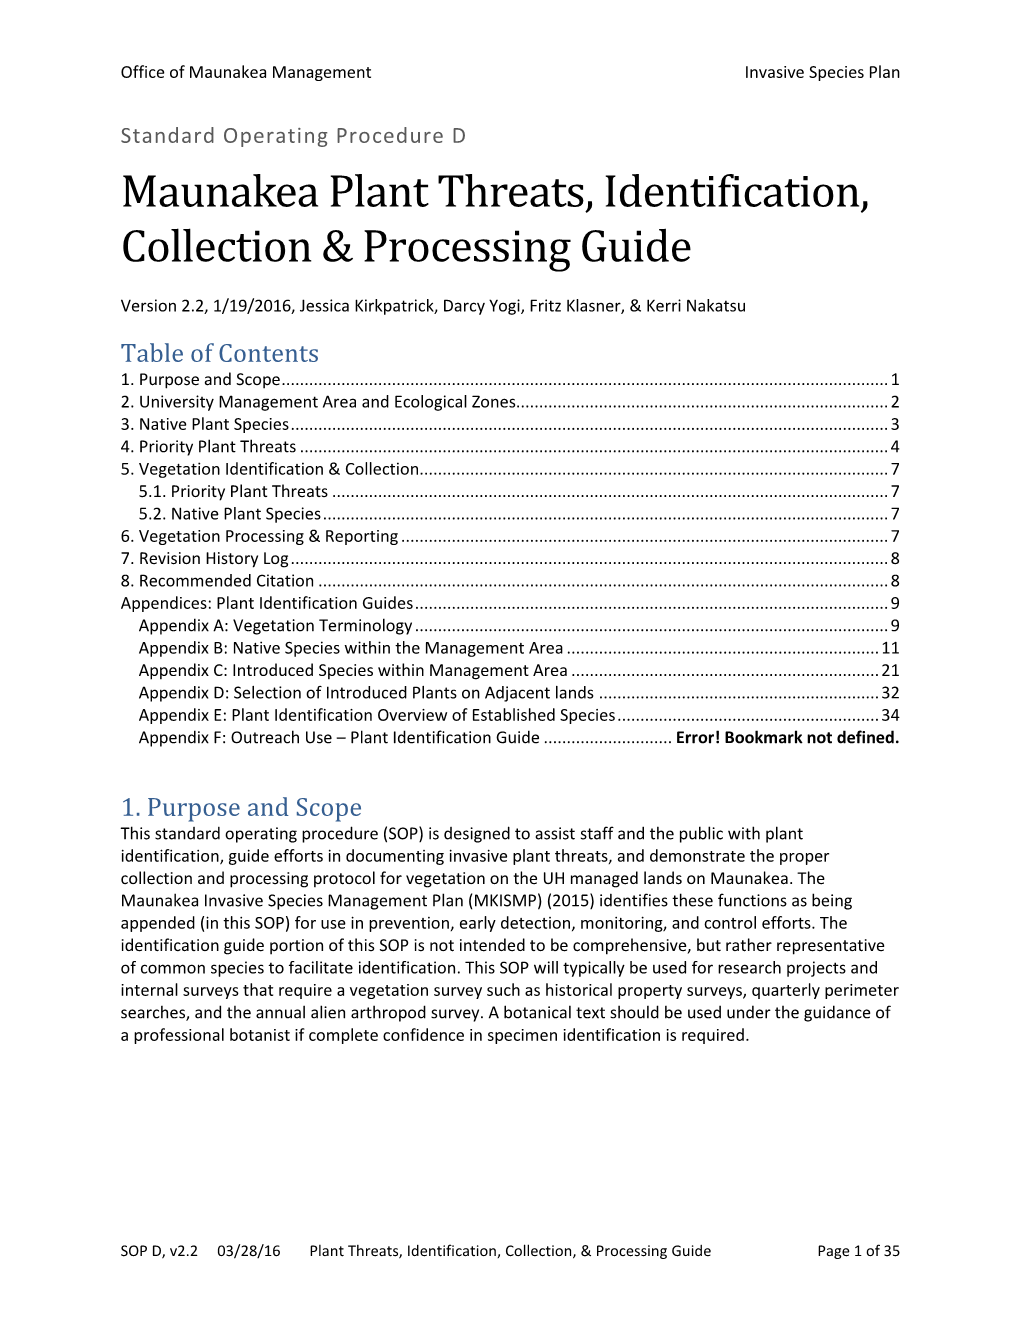 Maunakea Plant Threats, Identification, Collection & Processing Guide. V2.2